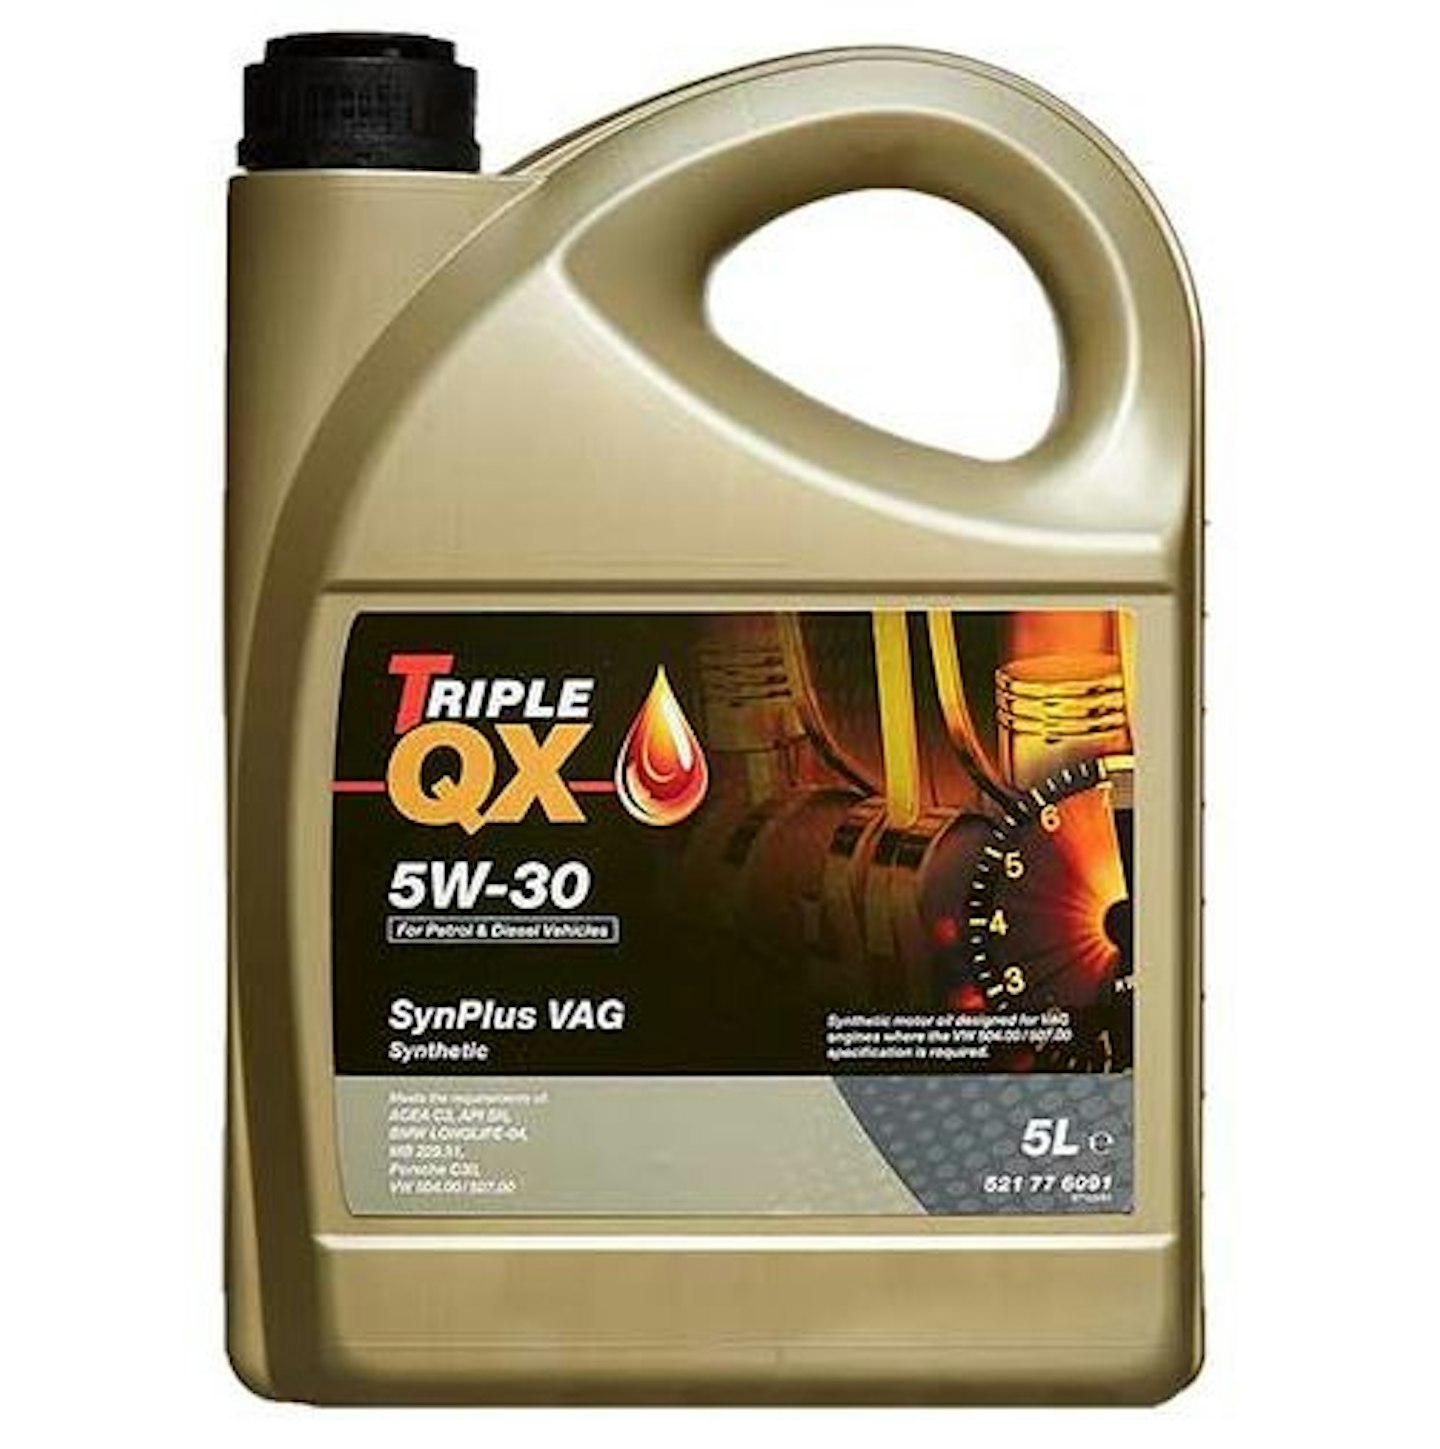 MANNOL Energy 5W30 C3 Fully Synthetic Engine Oil, 5 Litres : :  Automotive